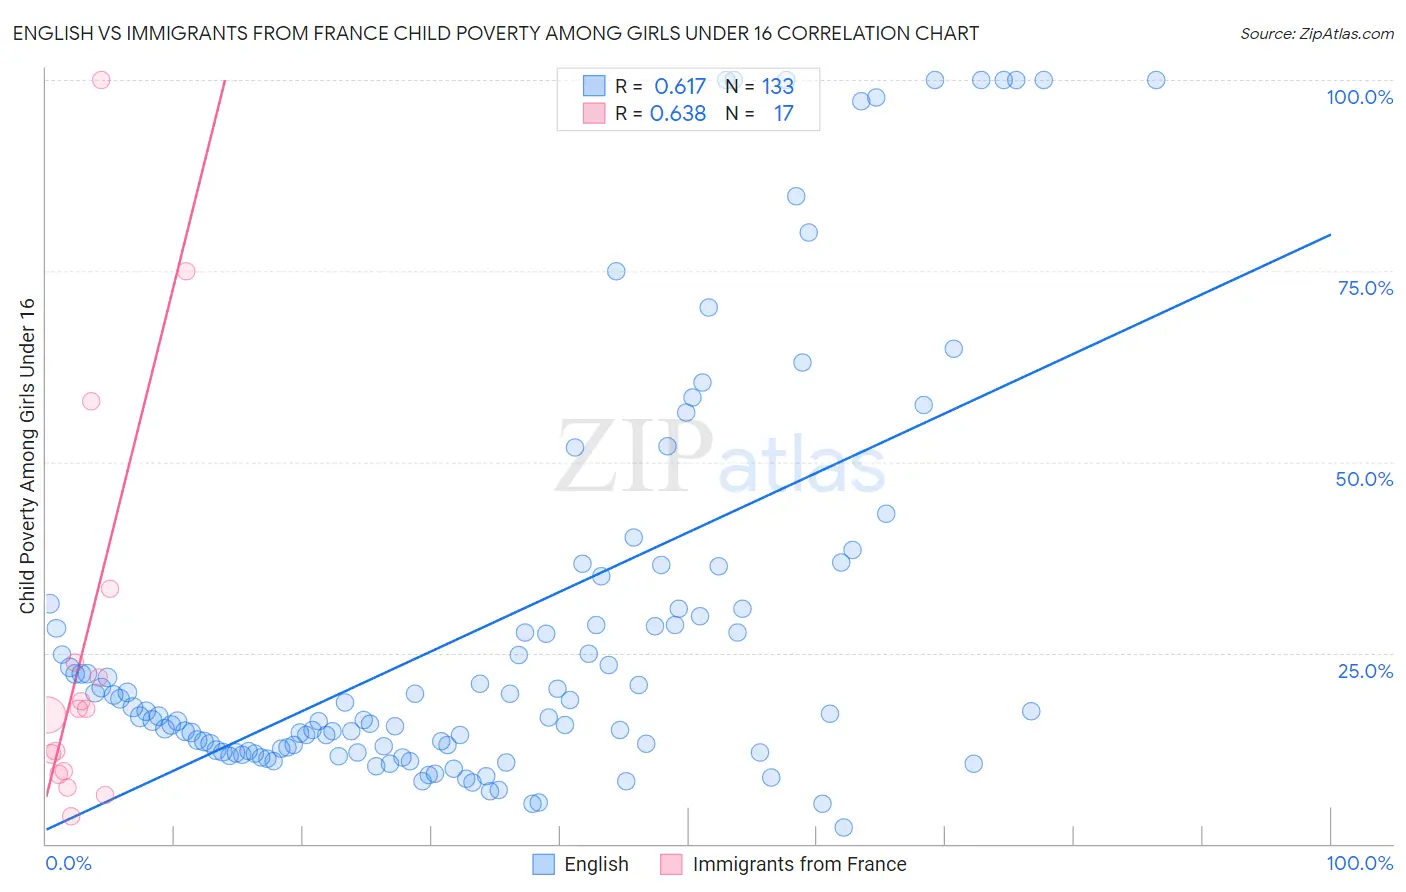 English vs Immigrants from France Child Poverty Among Girls Under 16